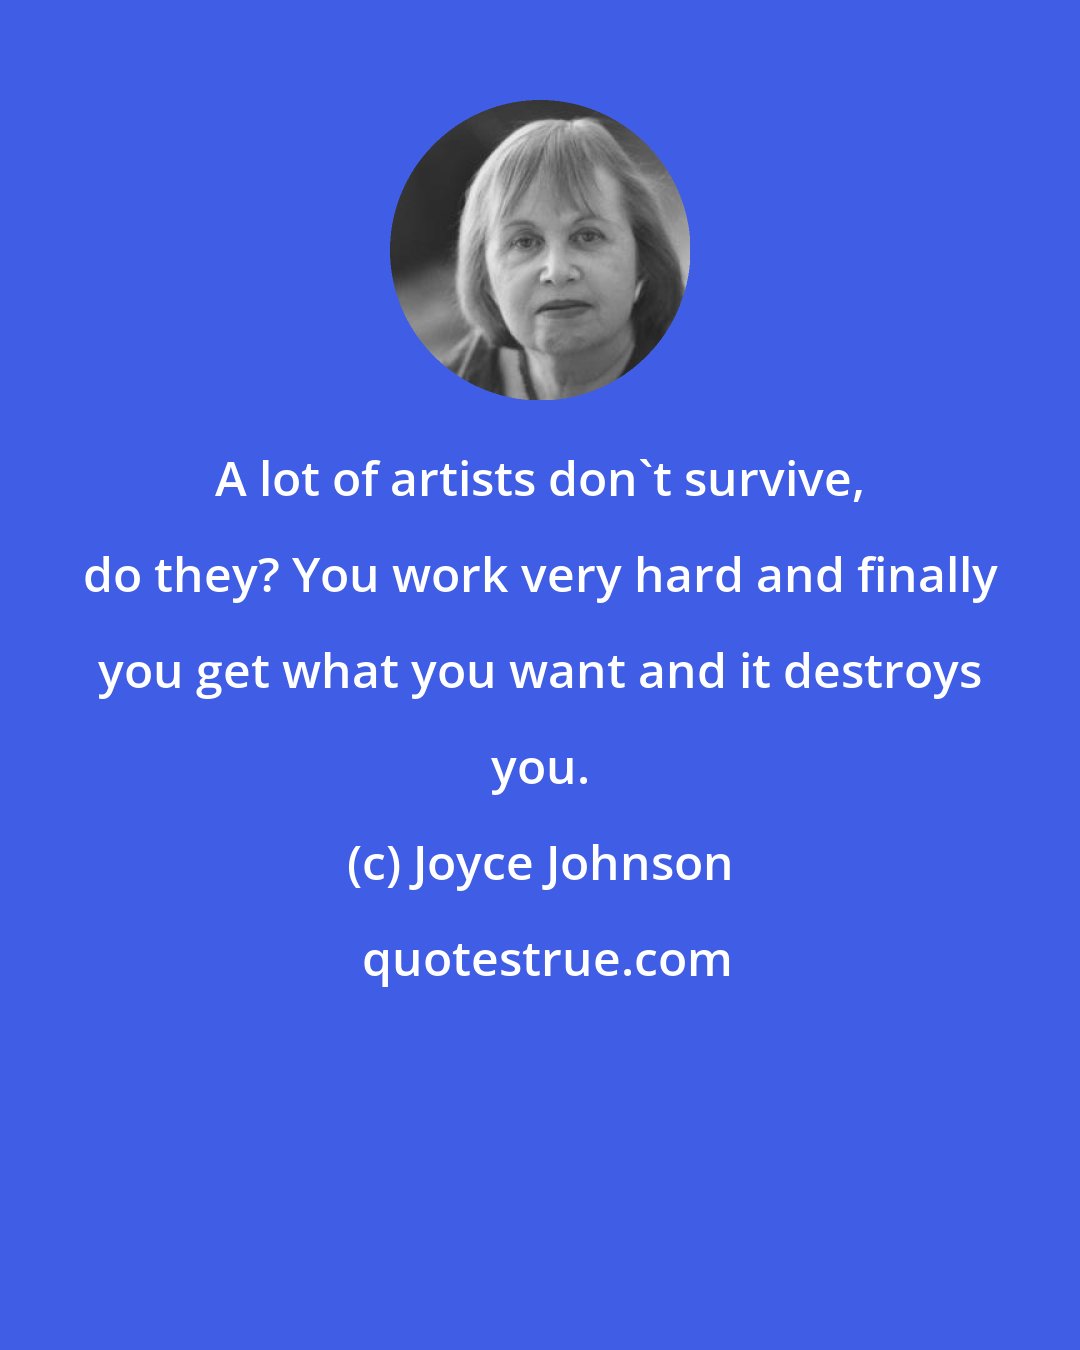 Joyce Johnson: A lot of artists don't survive, do they? You work very hard and finally you get what you want and it destroys you.